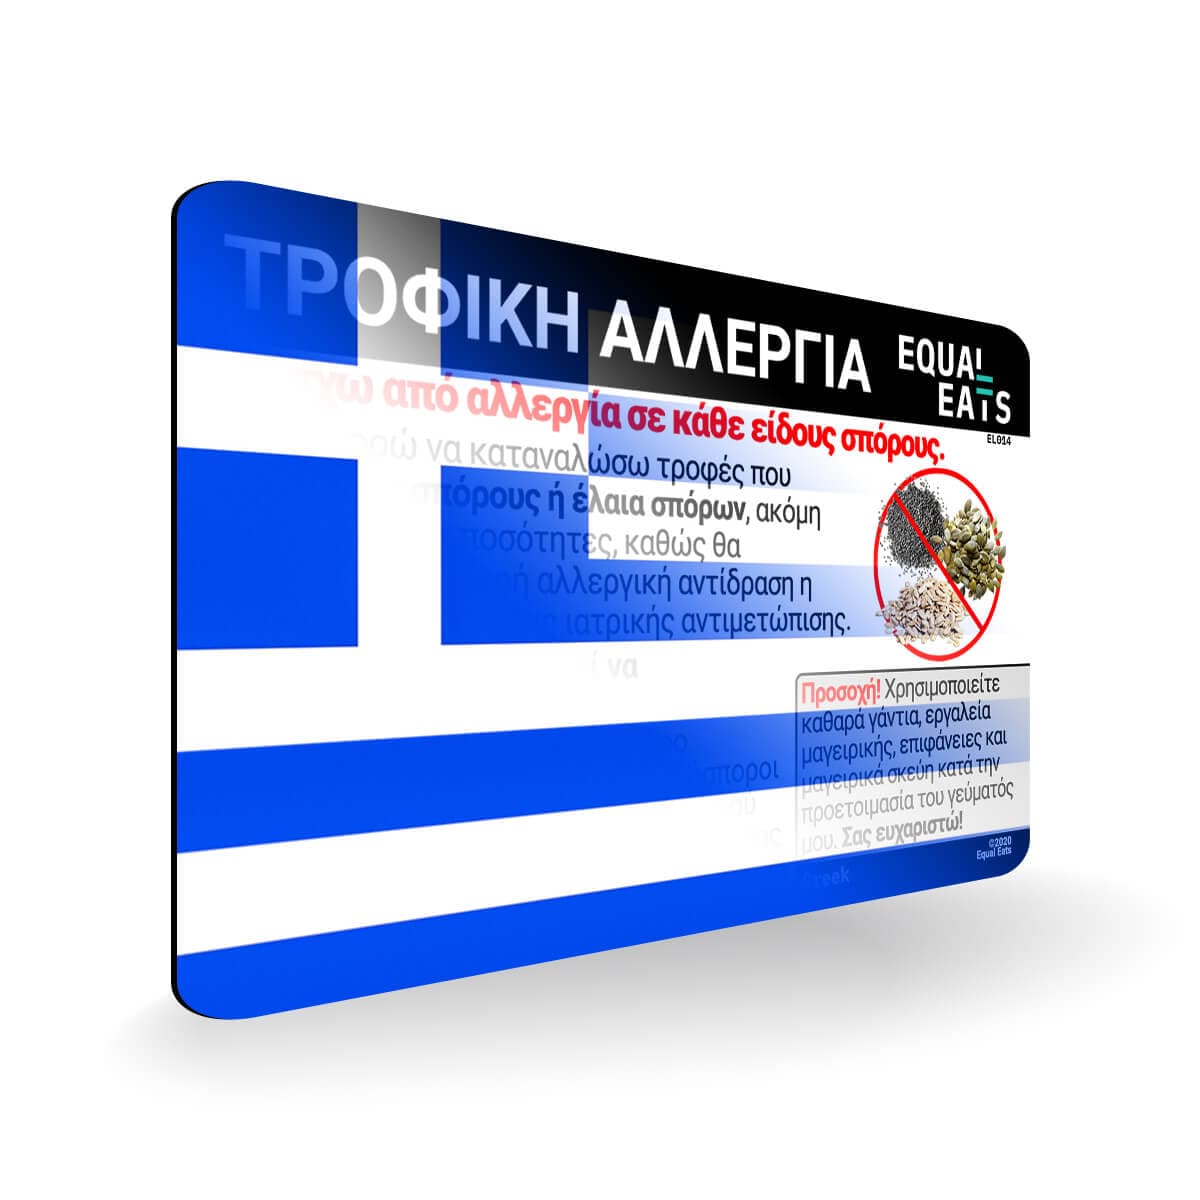 Seed Allergy in Greek. Seed Allergy Card for Greece